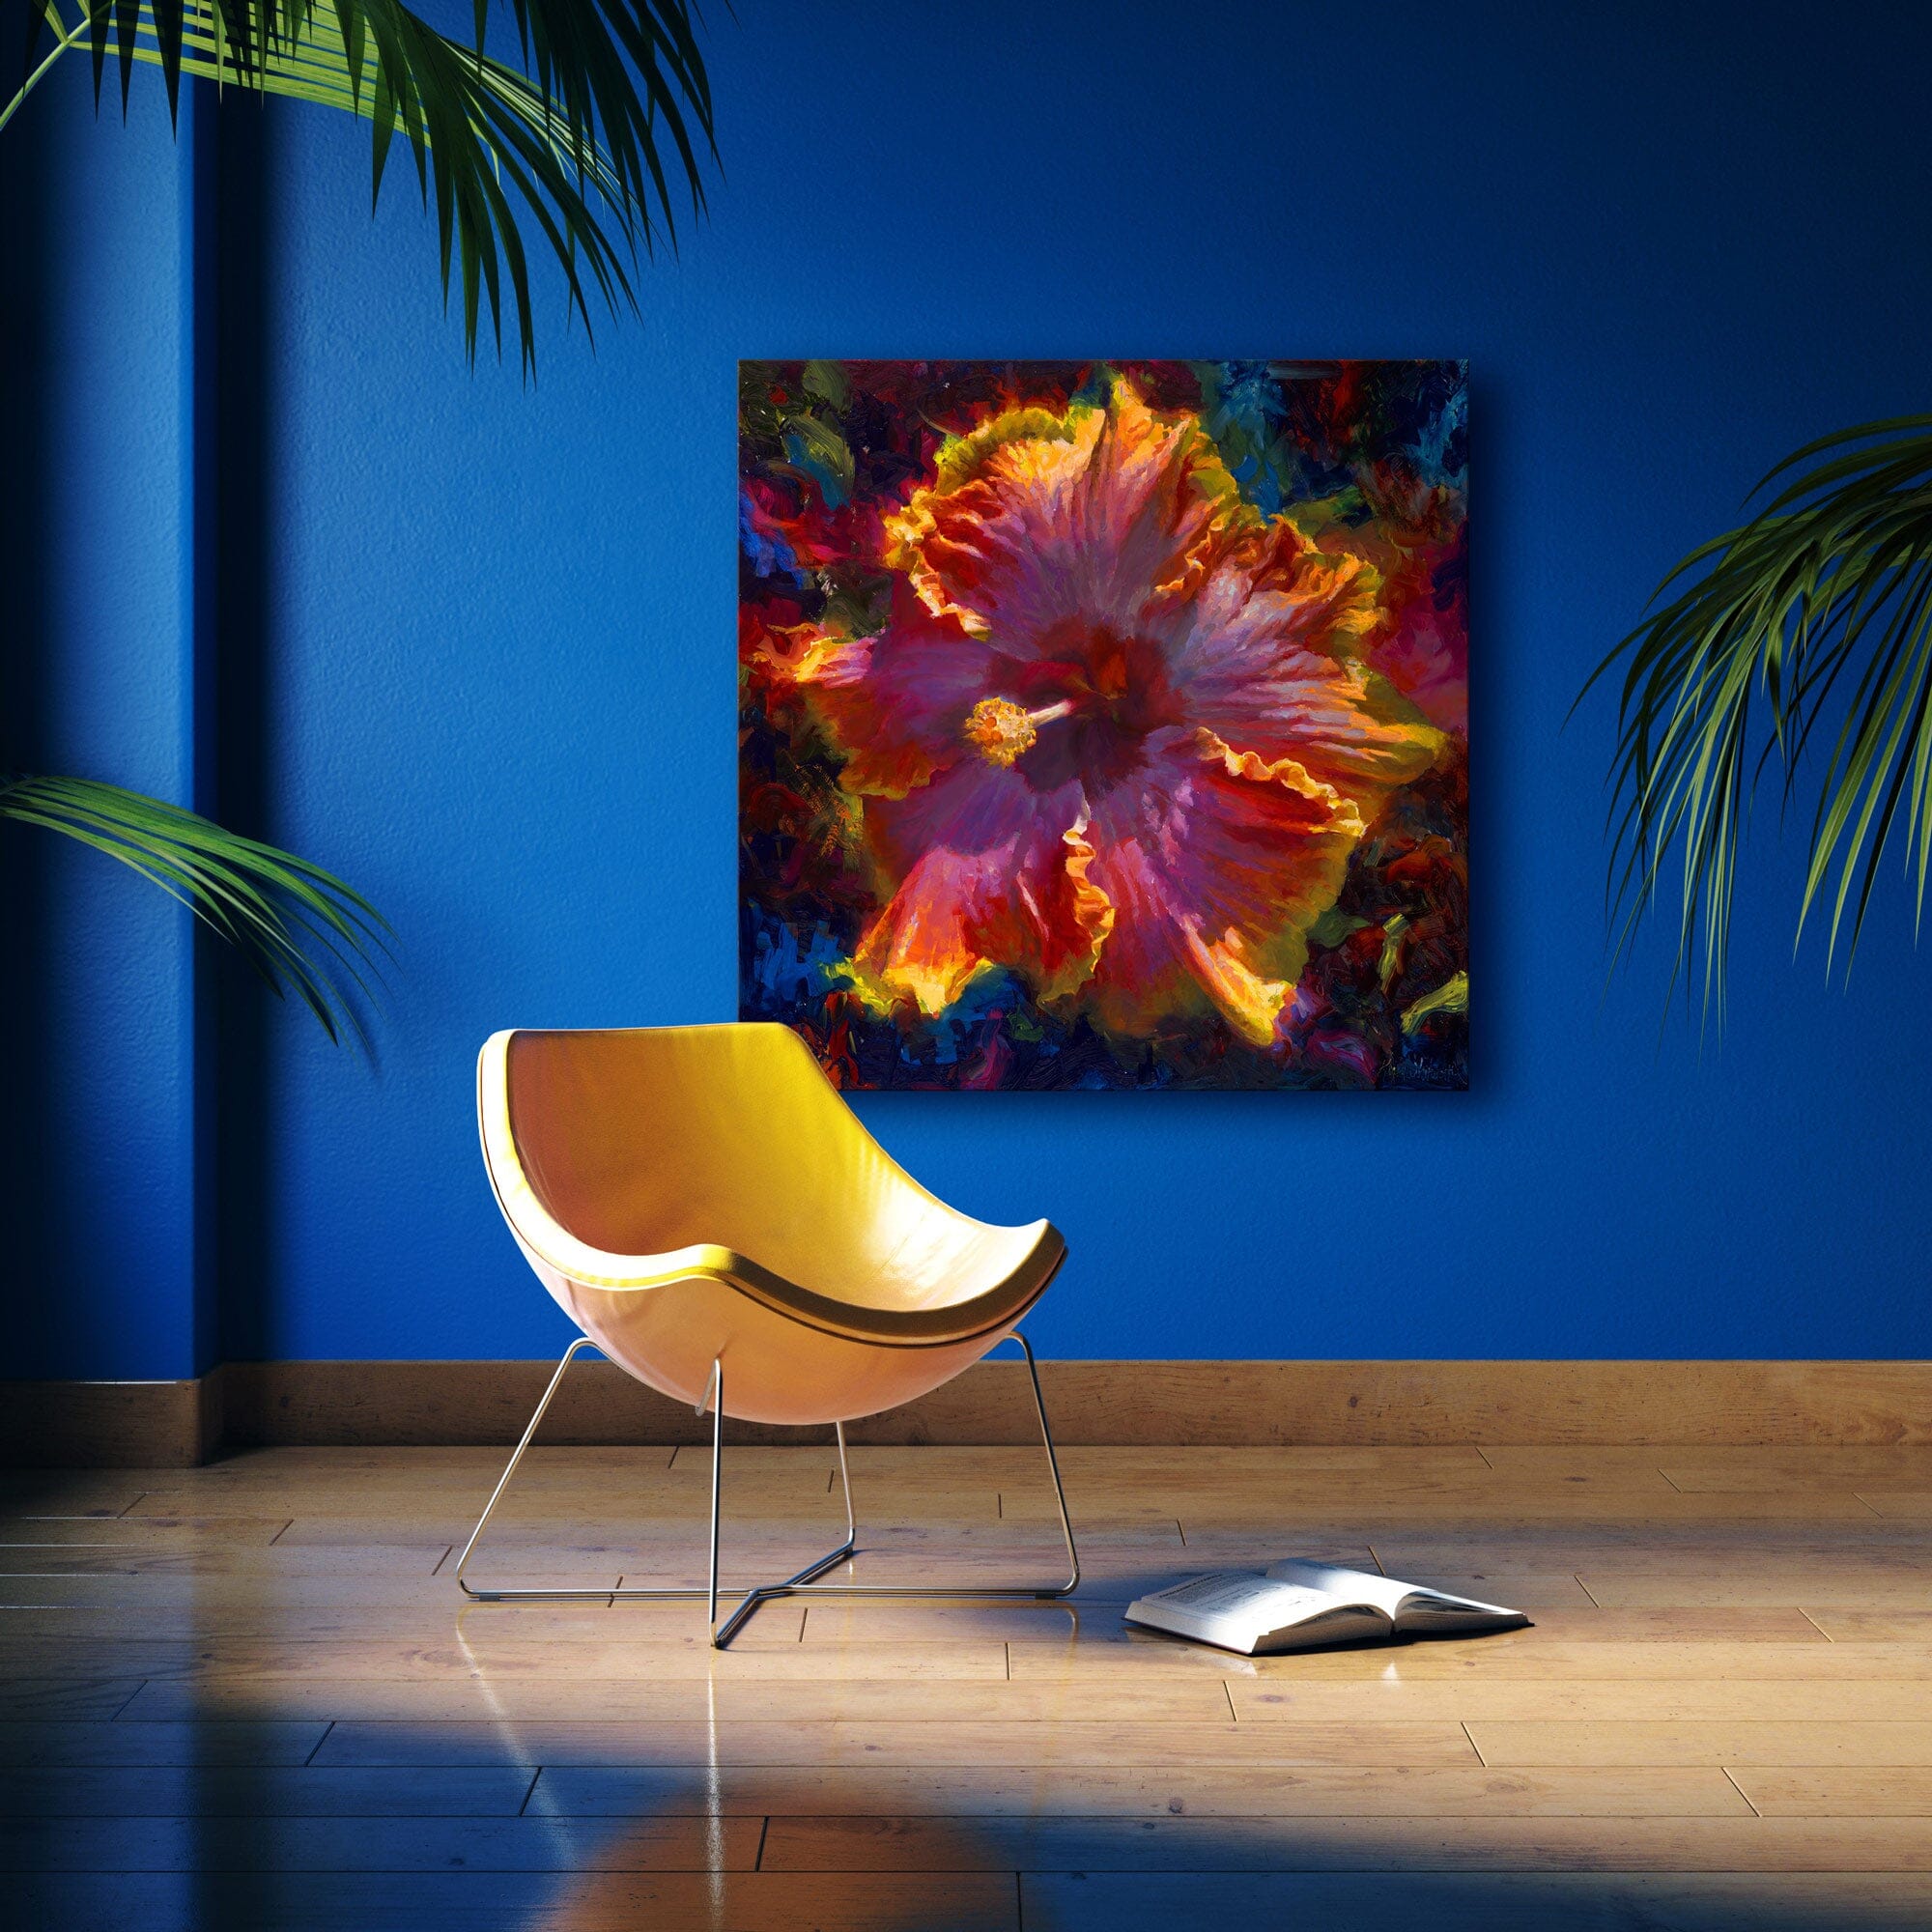 Large Hawaii flower wall art on blue wall. The art depicts a tropical hibiscus flower in rainbow colors on a square canvas. A yellow chair sits in front of the art with palm fronds framing the view.